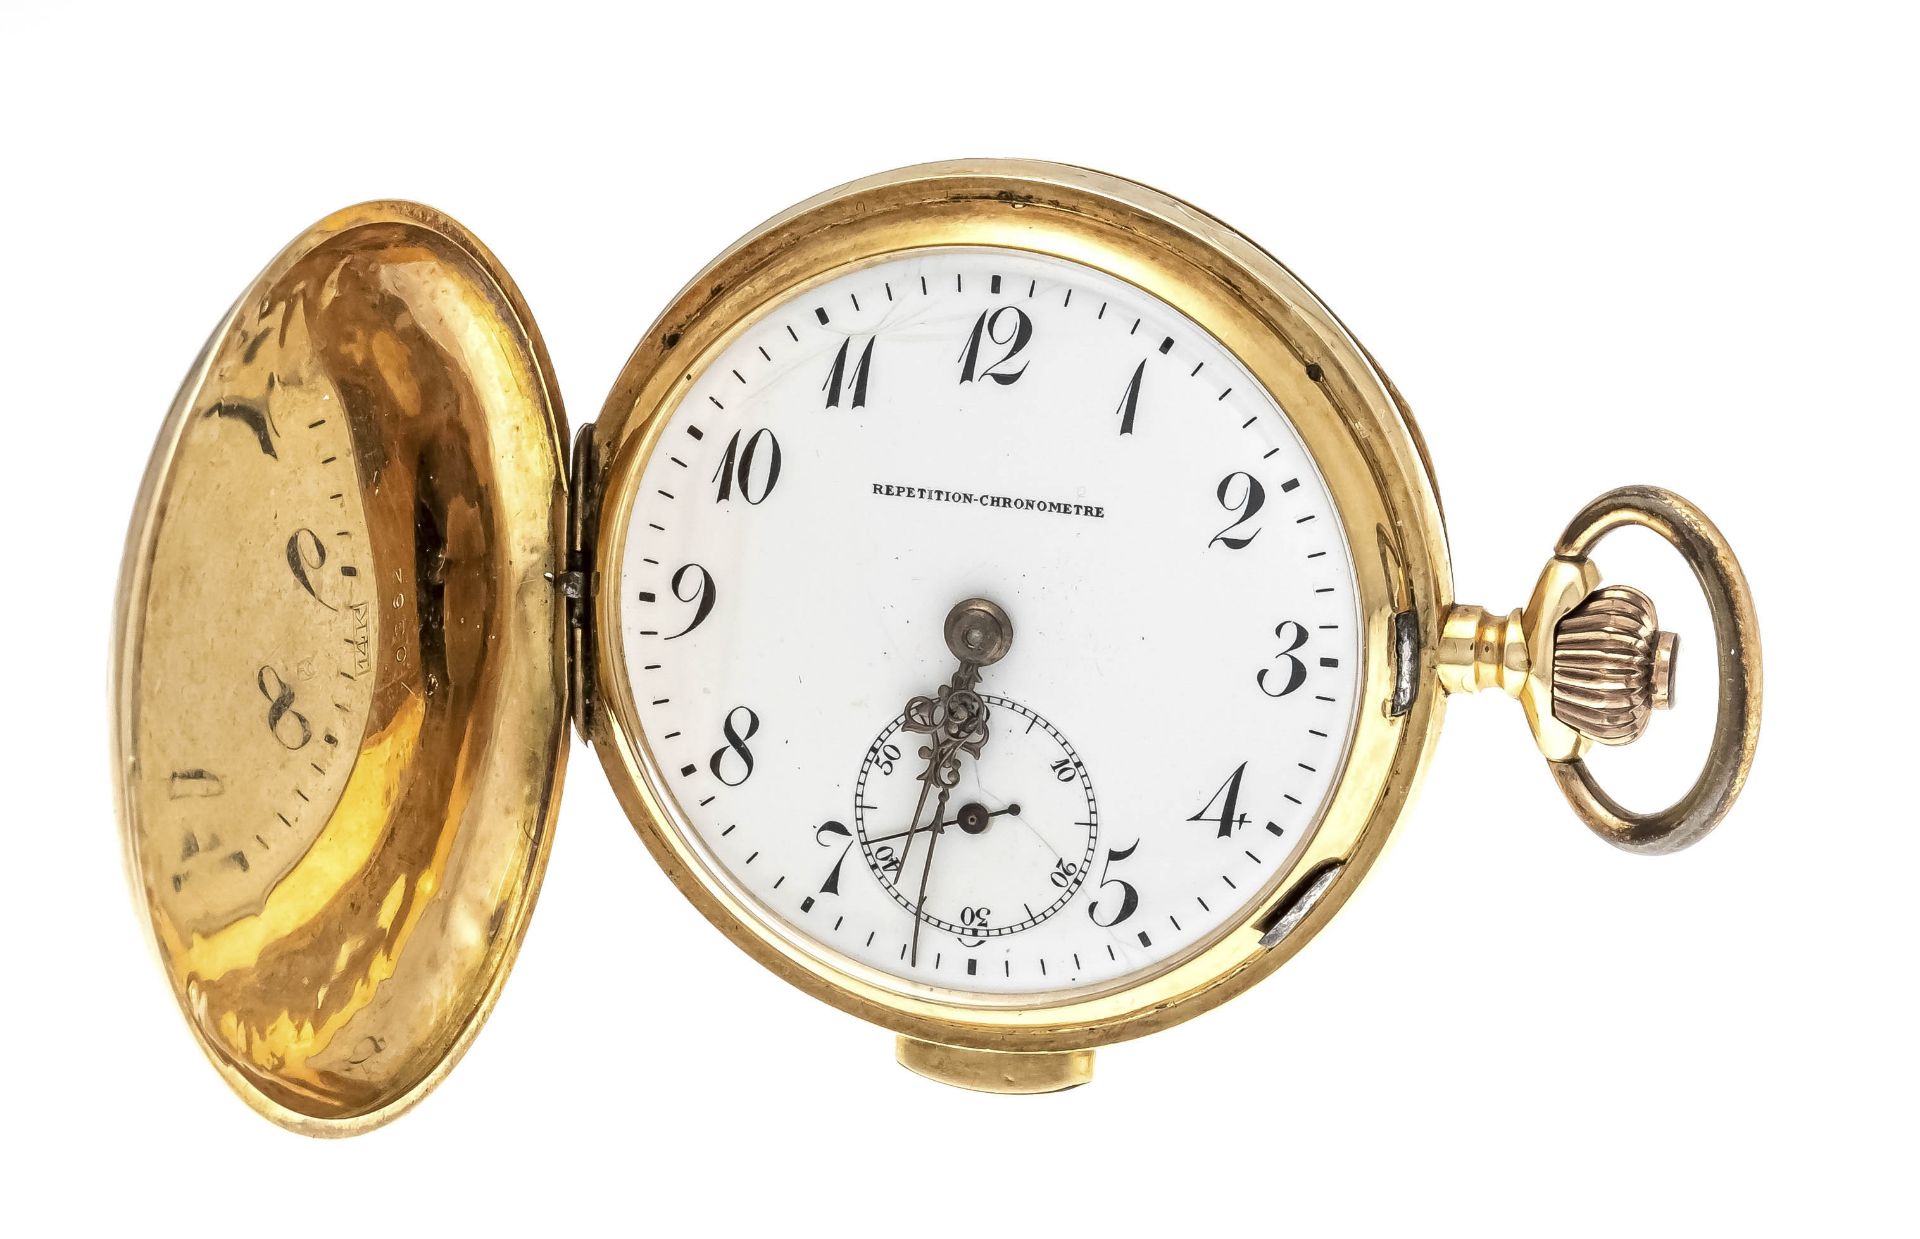 1/4 hour repeater pocket watch, chronometer, sprung cover, 585/000 GG, 2 gold covers, guilloché